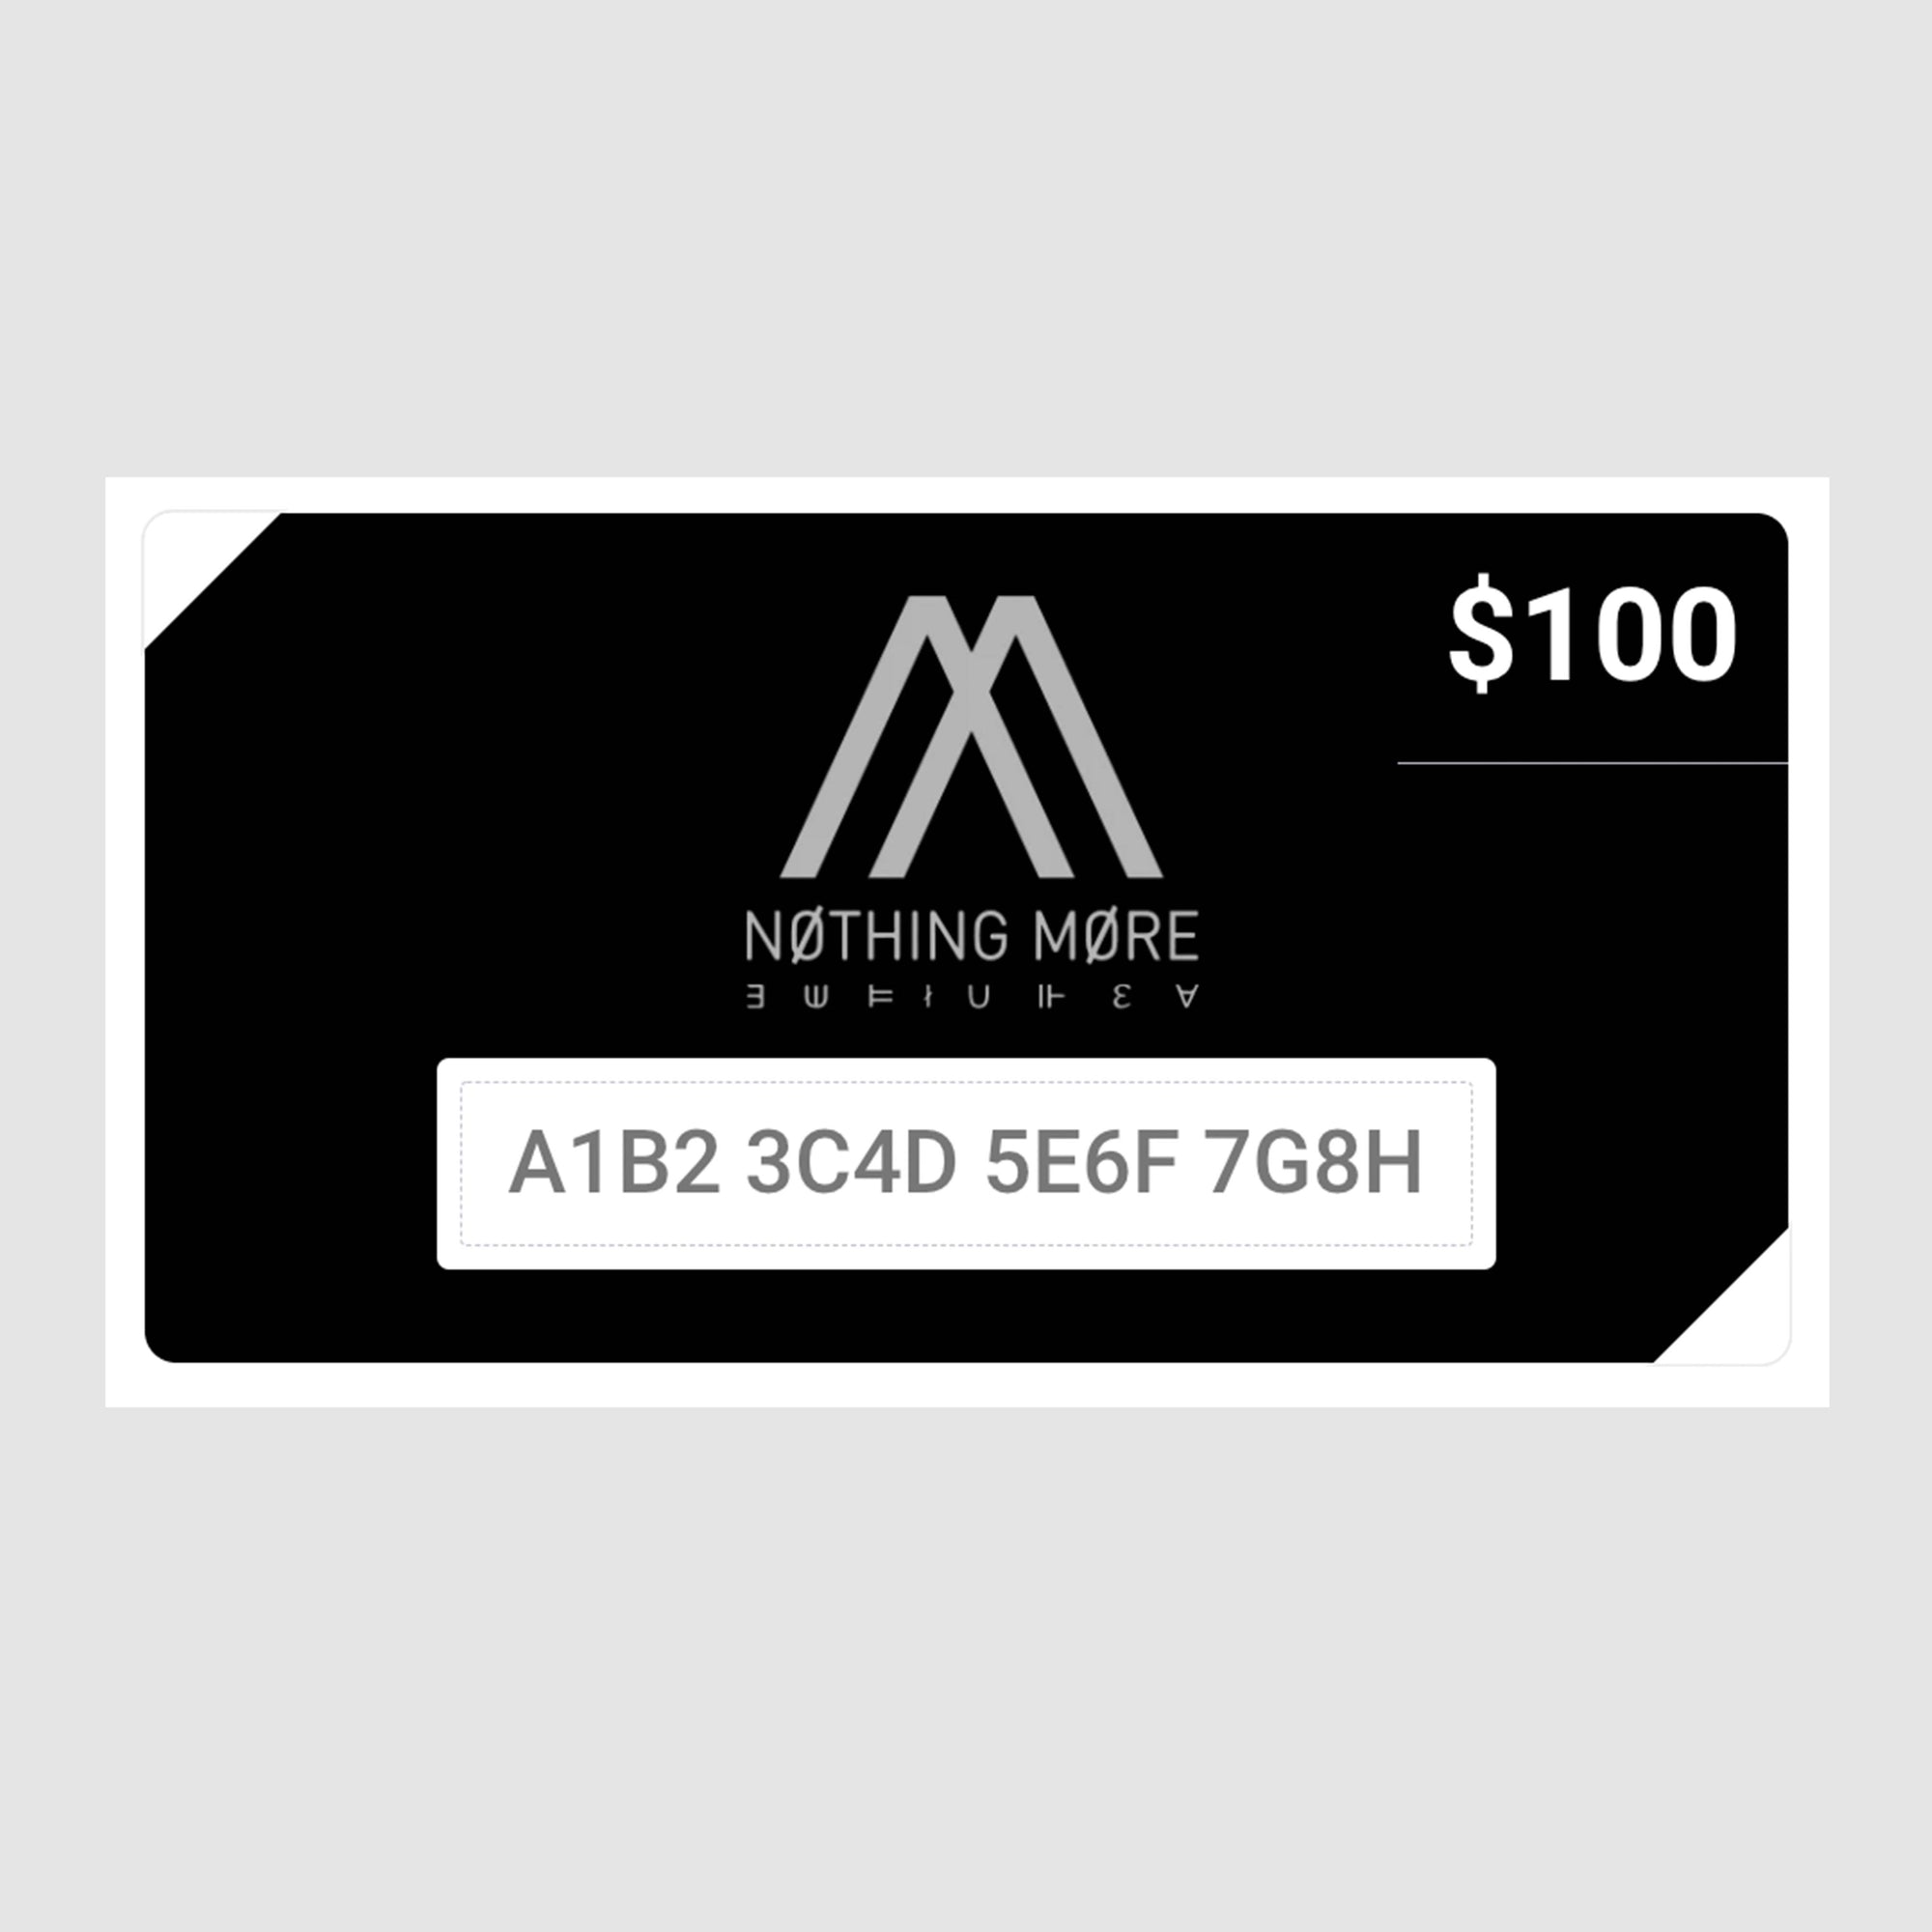 NOTHING MORE GIFT CARDS